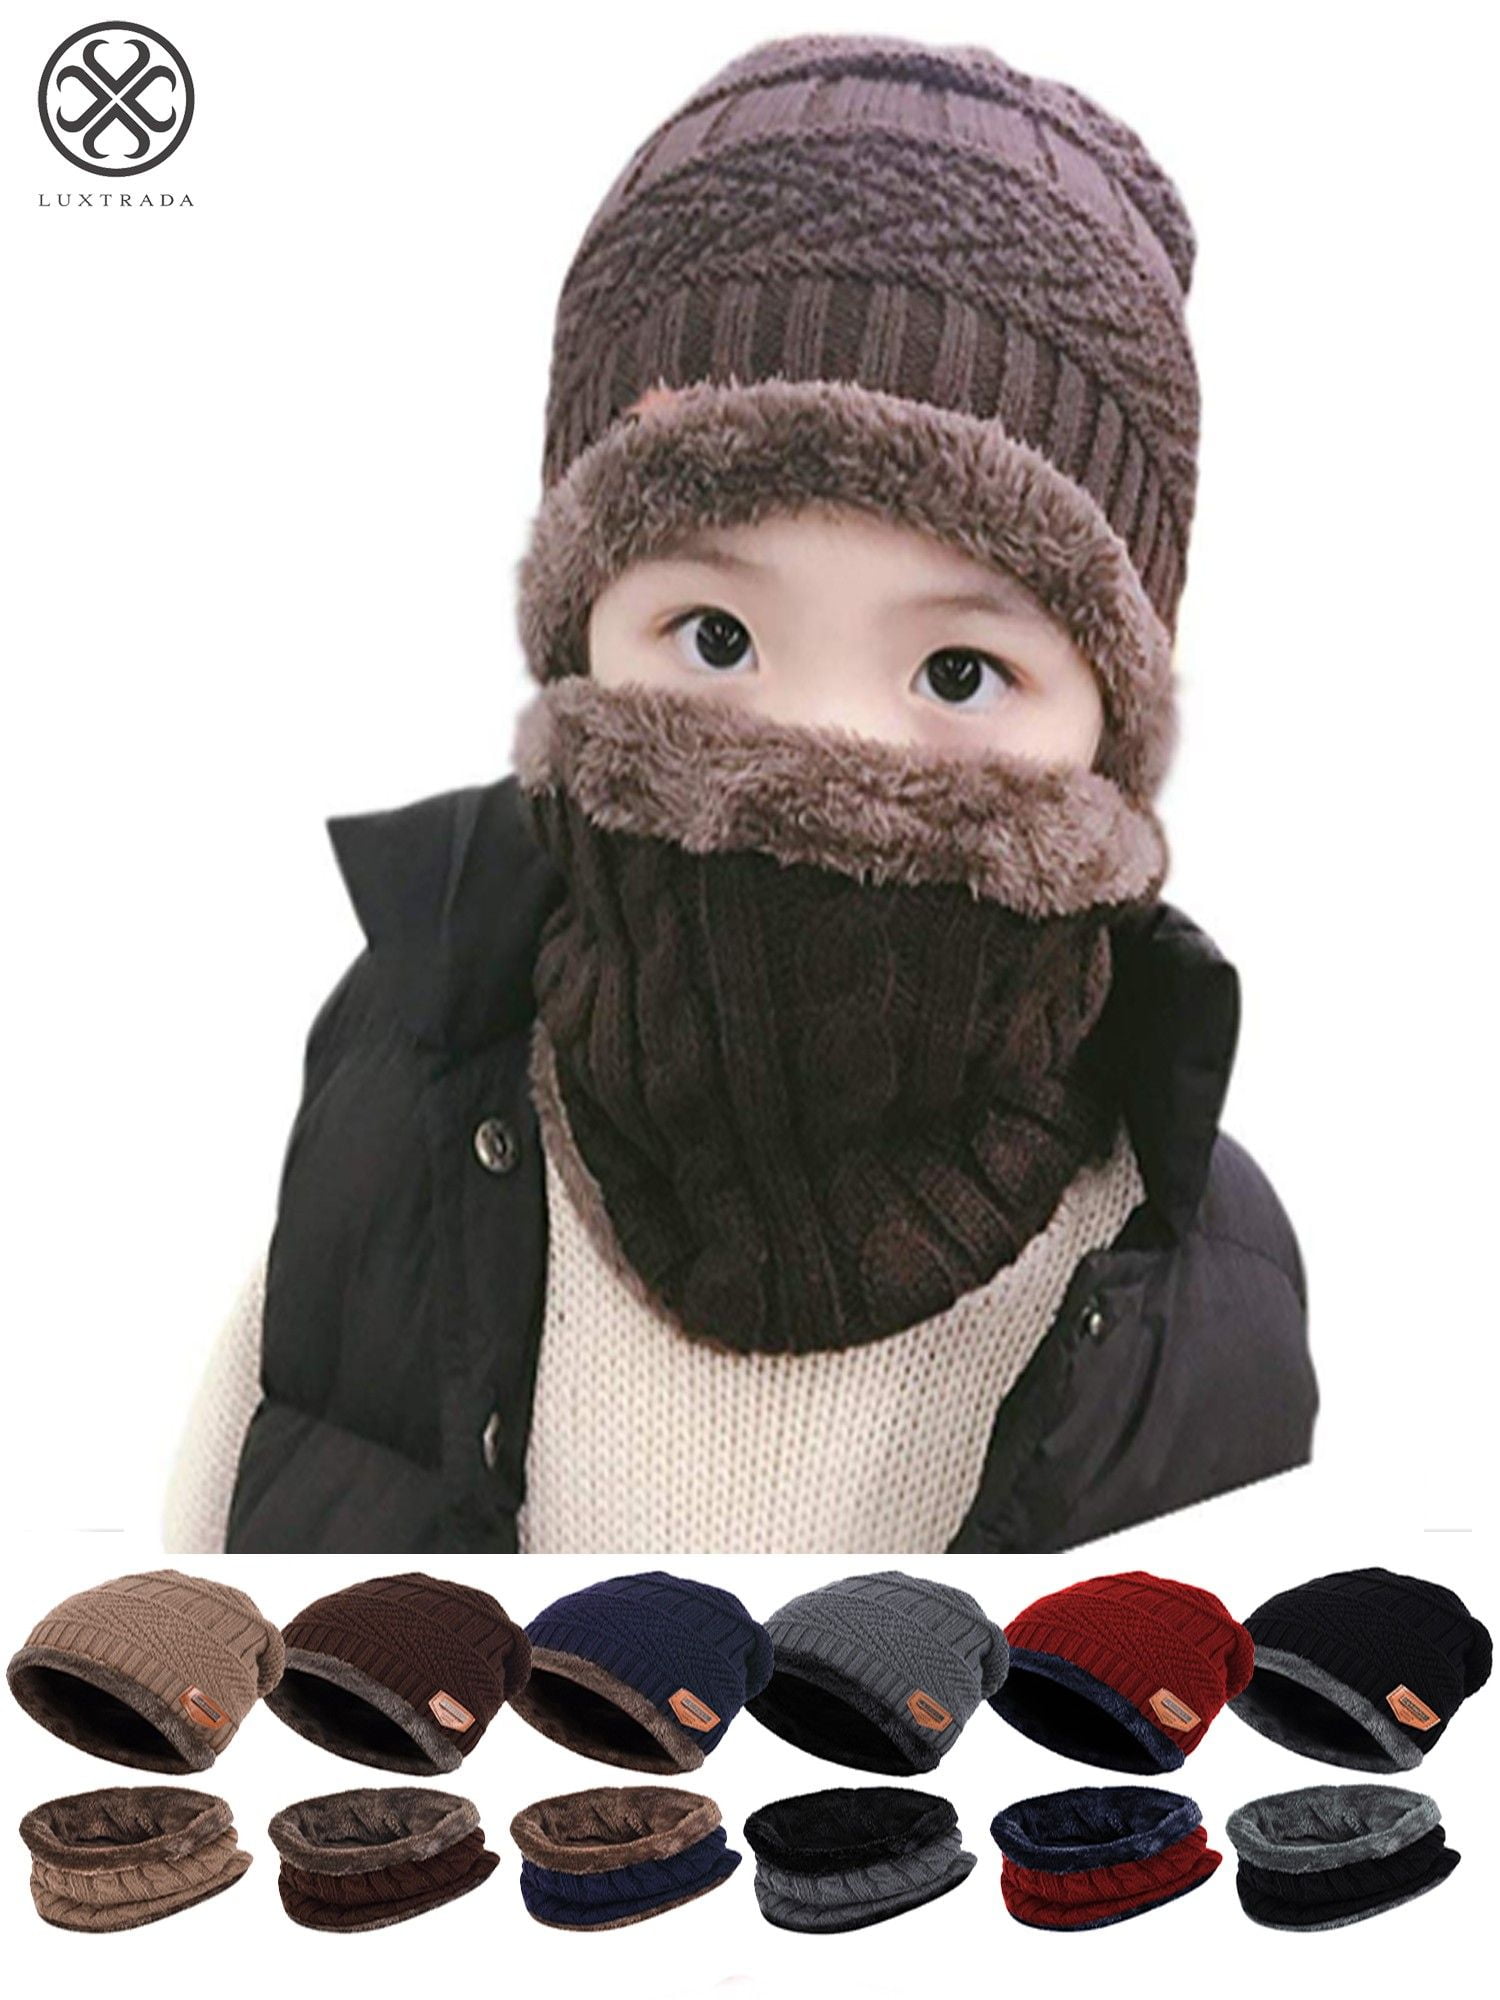 5-14 Years Winter Beanie Scarf for Boys Girls Hats Circle Scarf Kids Slouchy Skull Cap